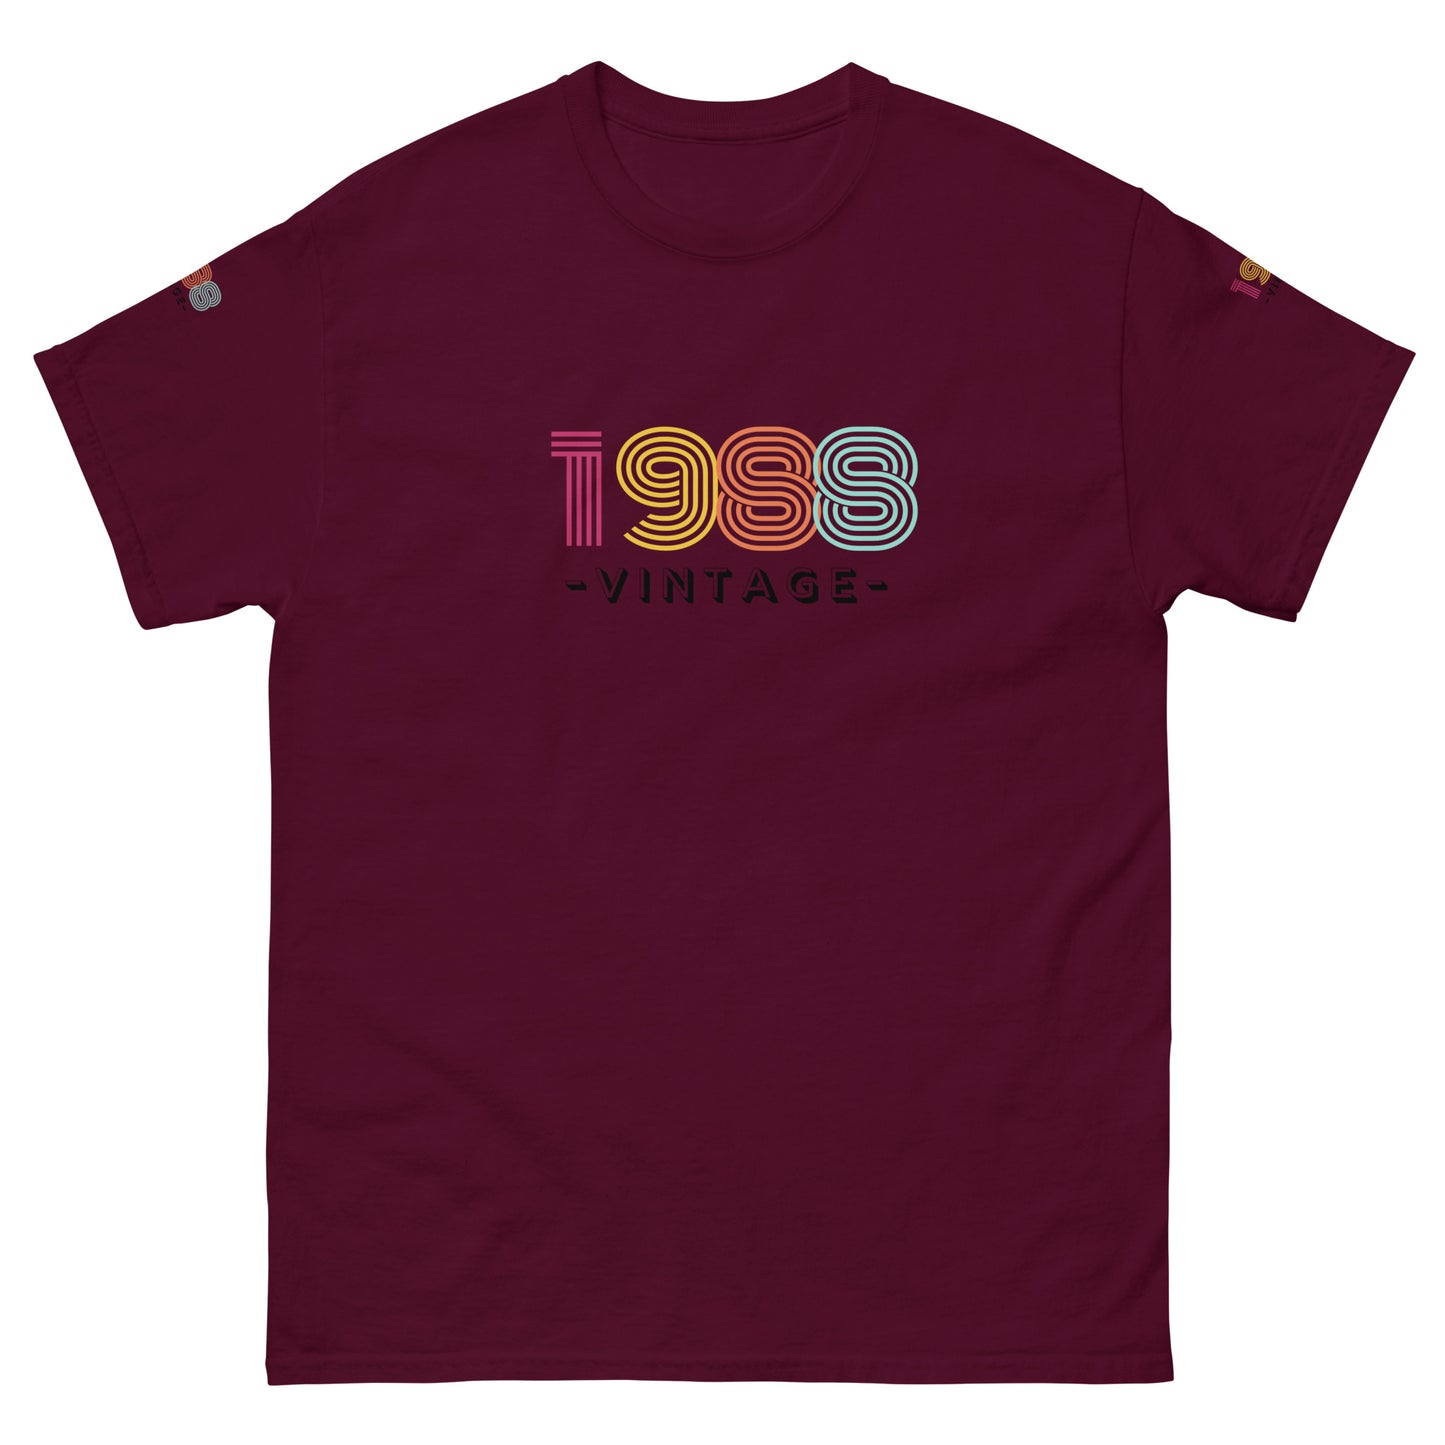 0-A-00 1988 vintage classic tee